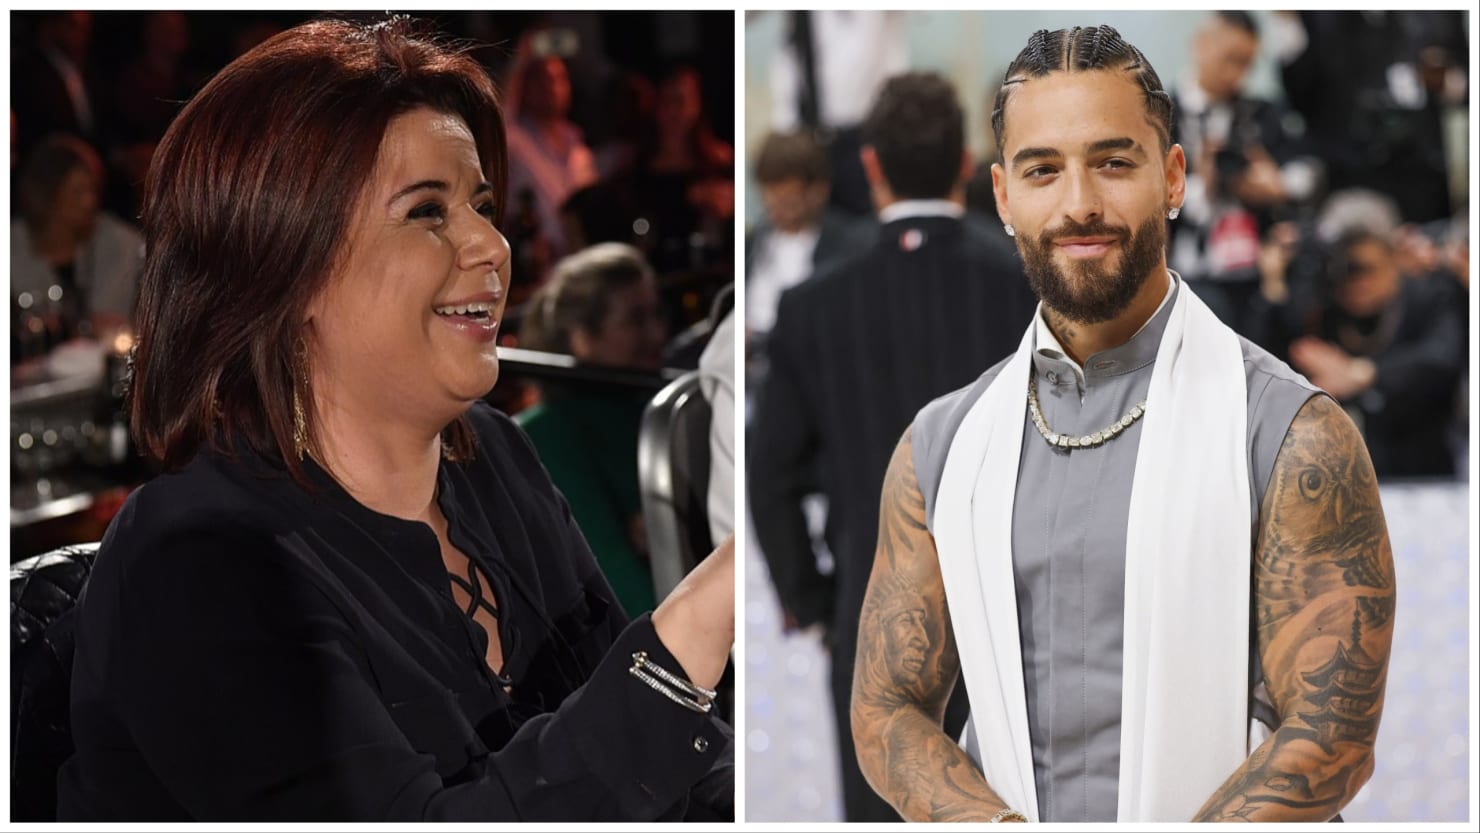 The View' Host Skewered for Gushing She'd 'Like to Breastfeed' Maluma